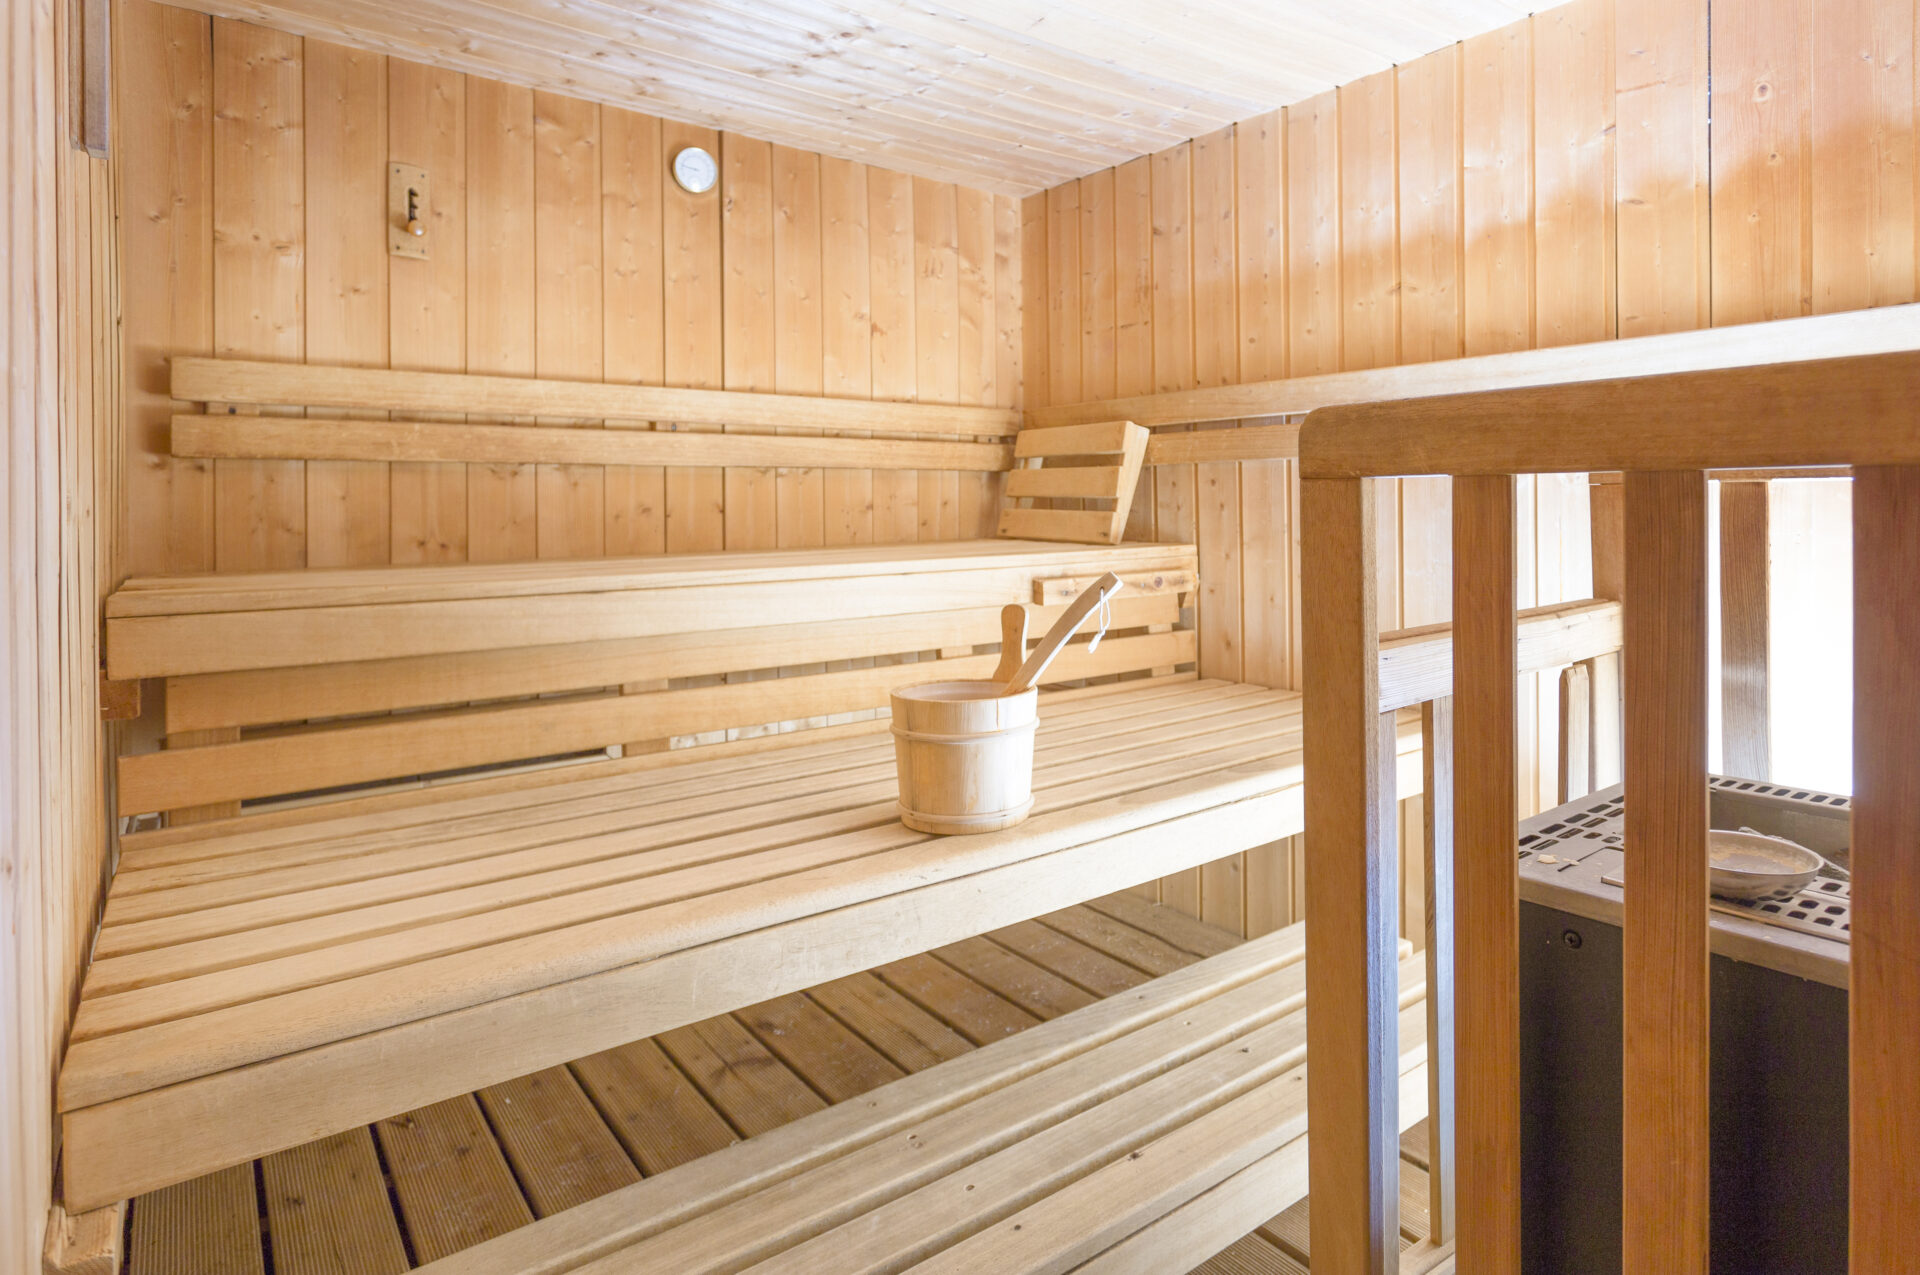 The sauna at MMV Le Val Cenis